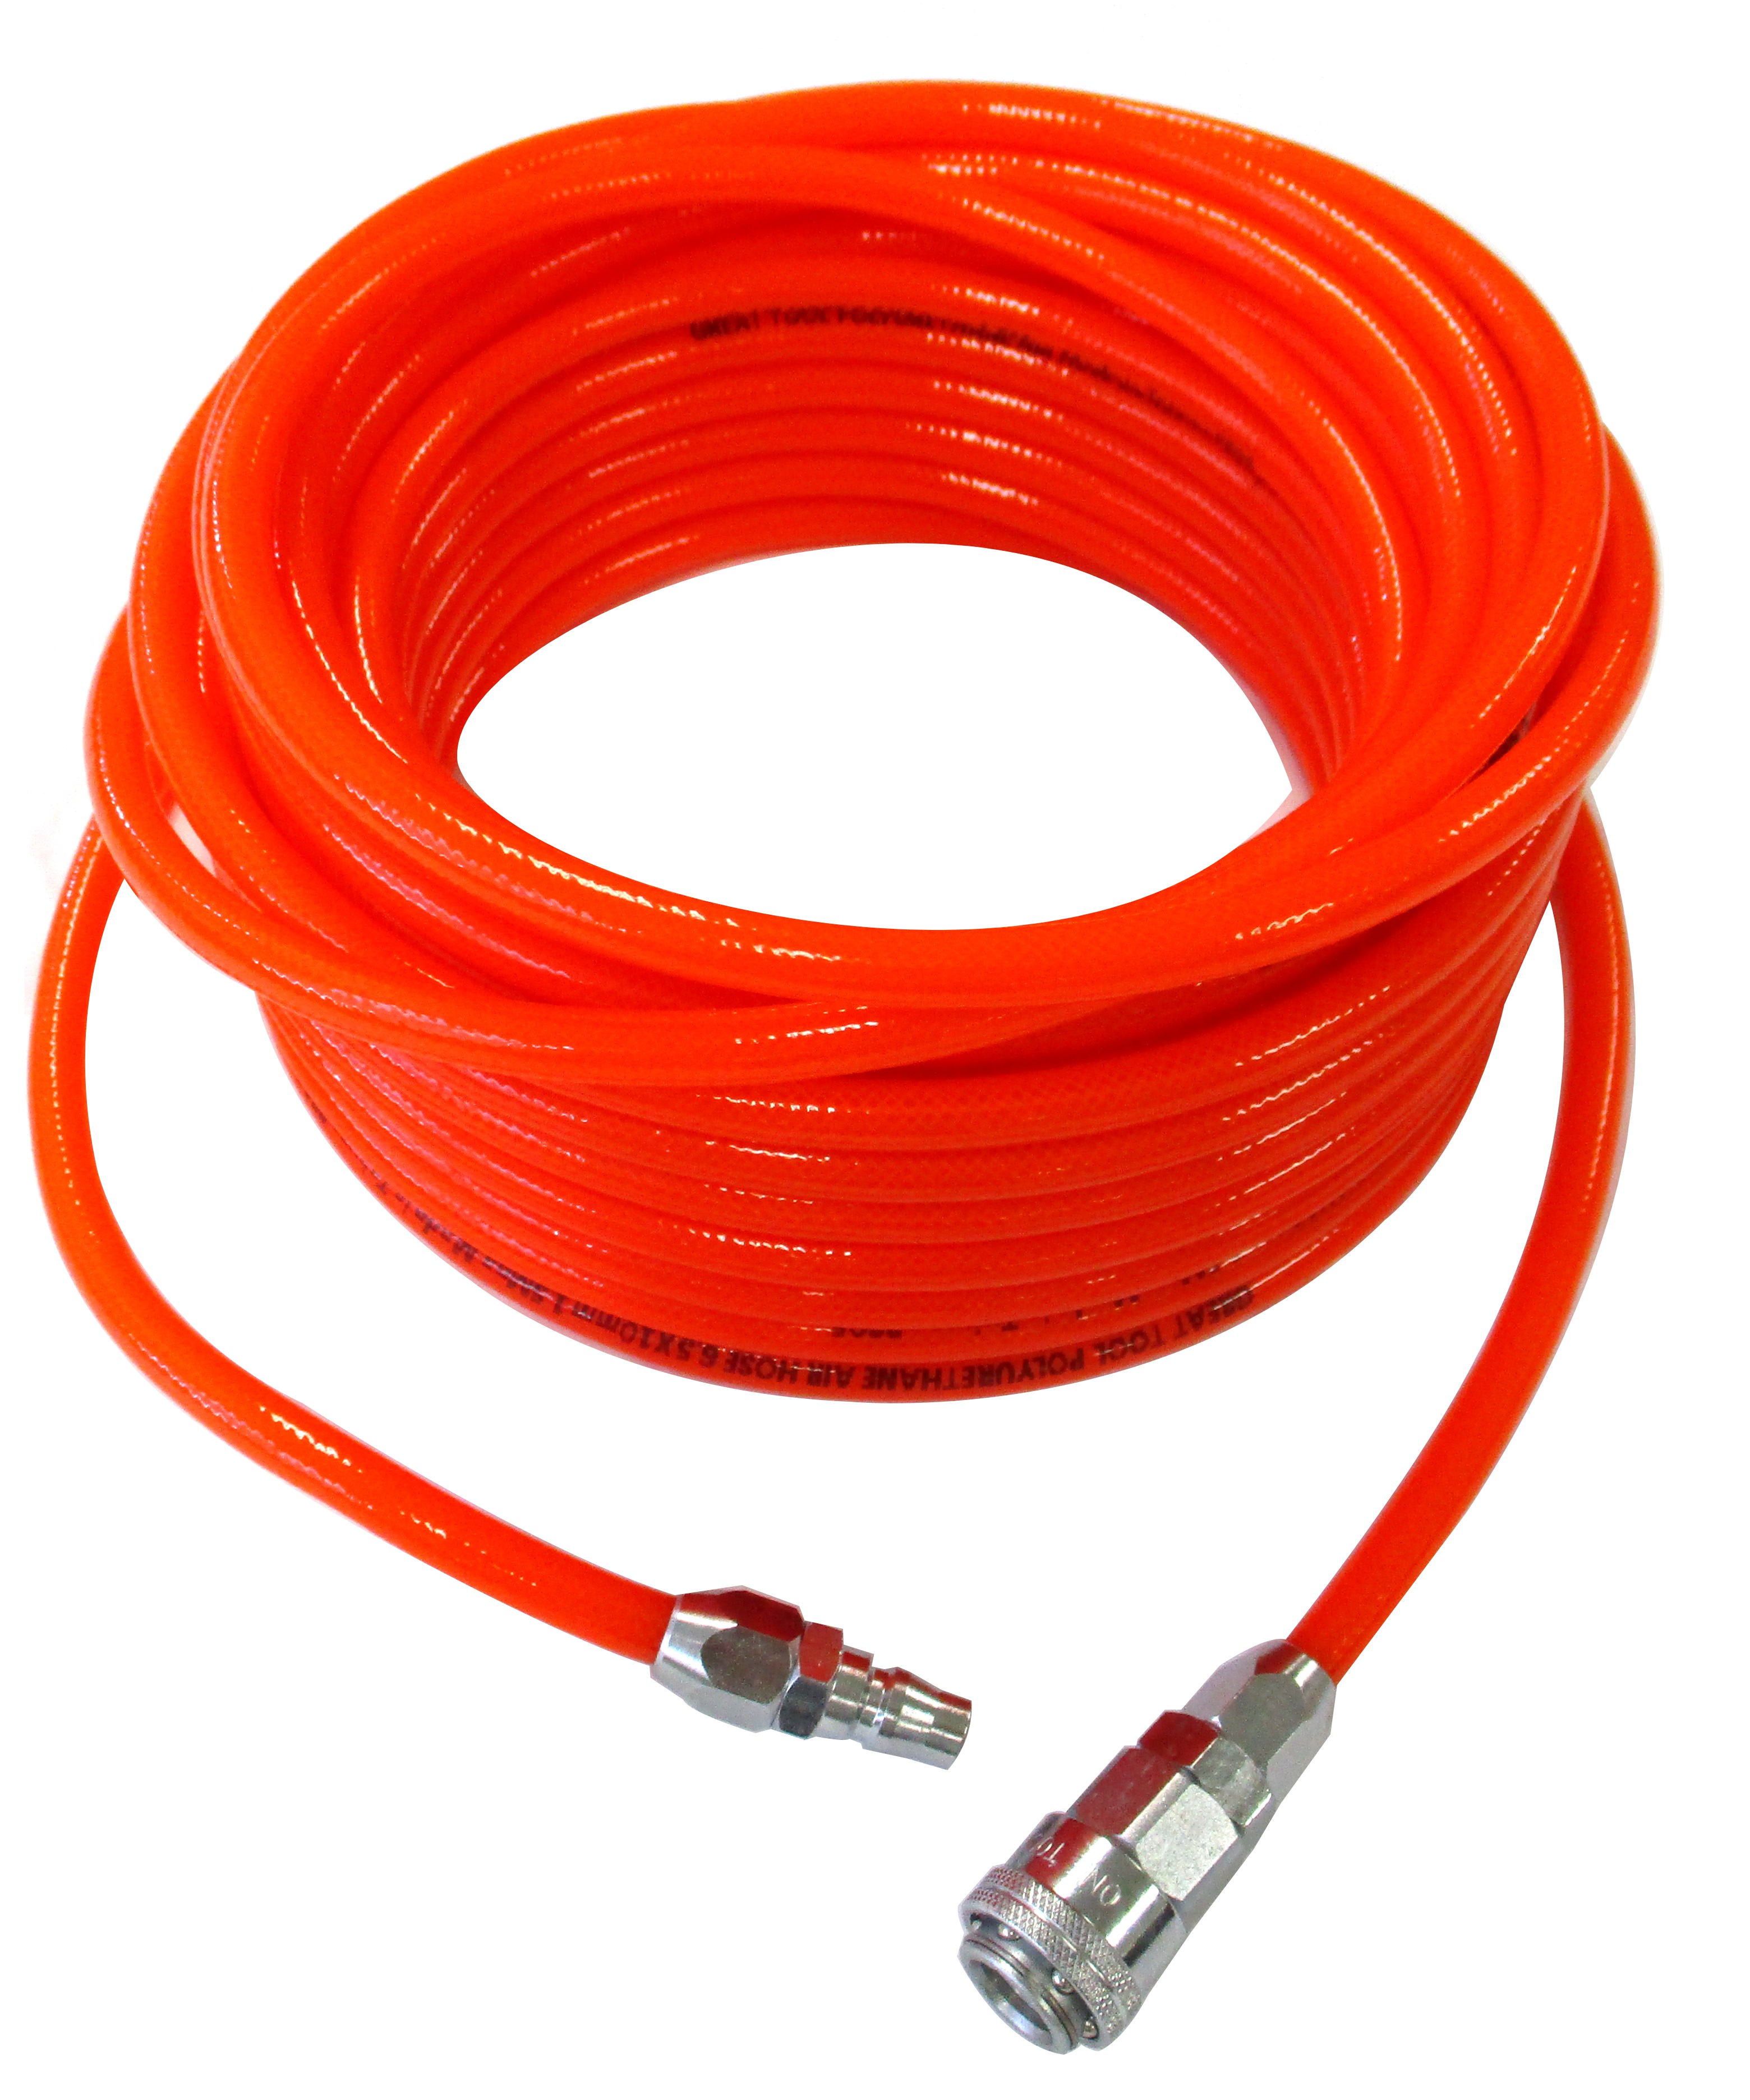 GREATTOOL One-Touch Type Air Hose